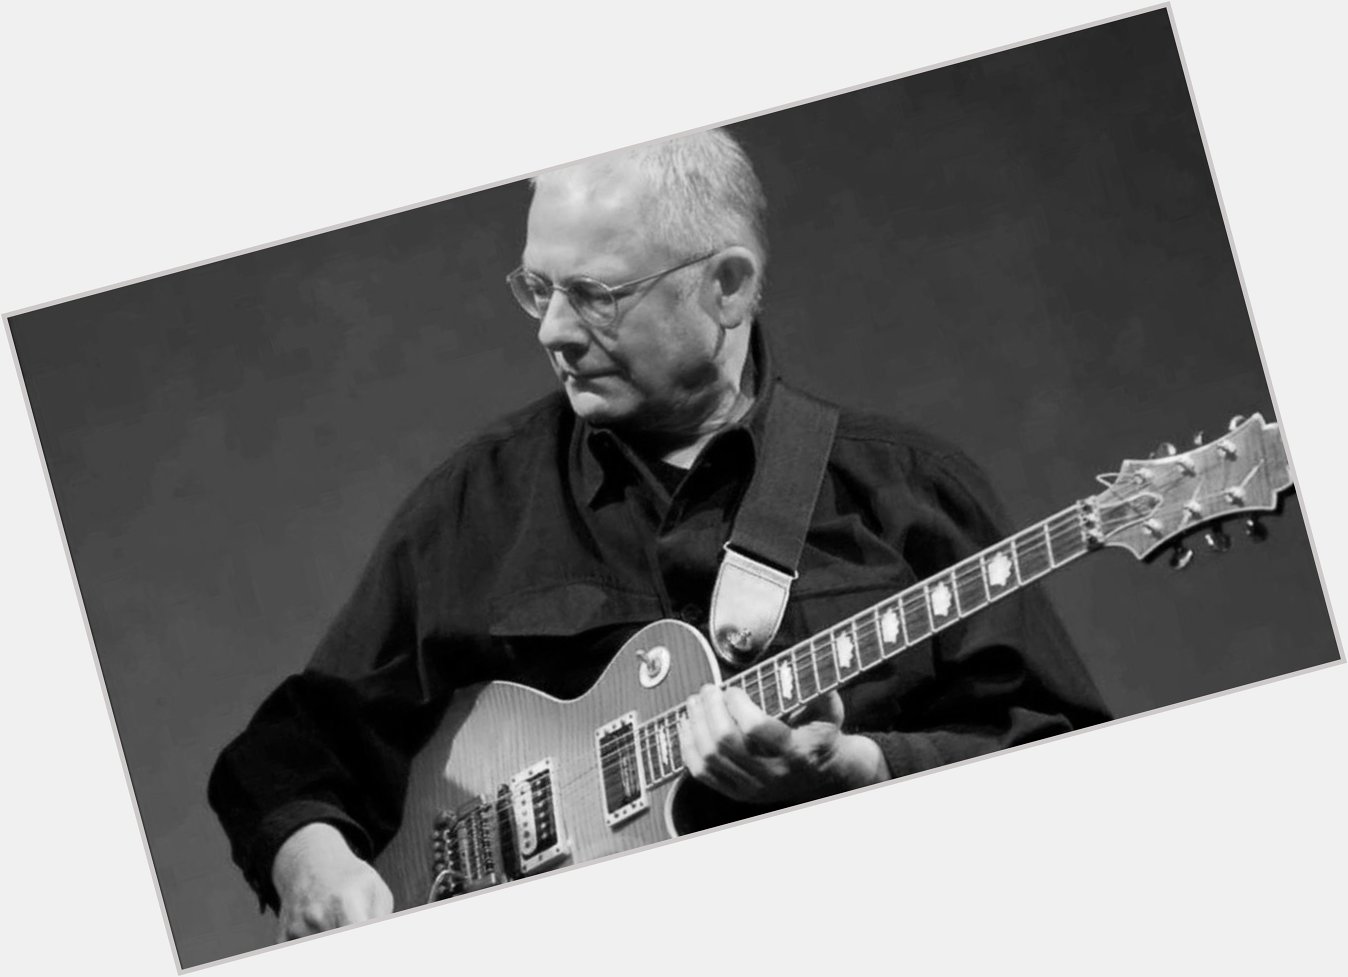 Happy birthday to Robert Fripp, who is 71 today! 